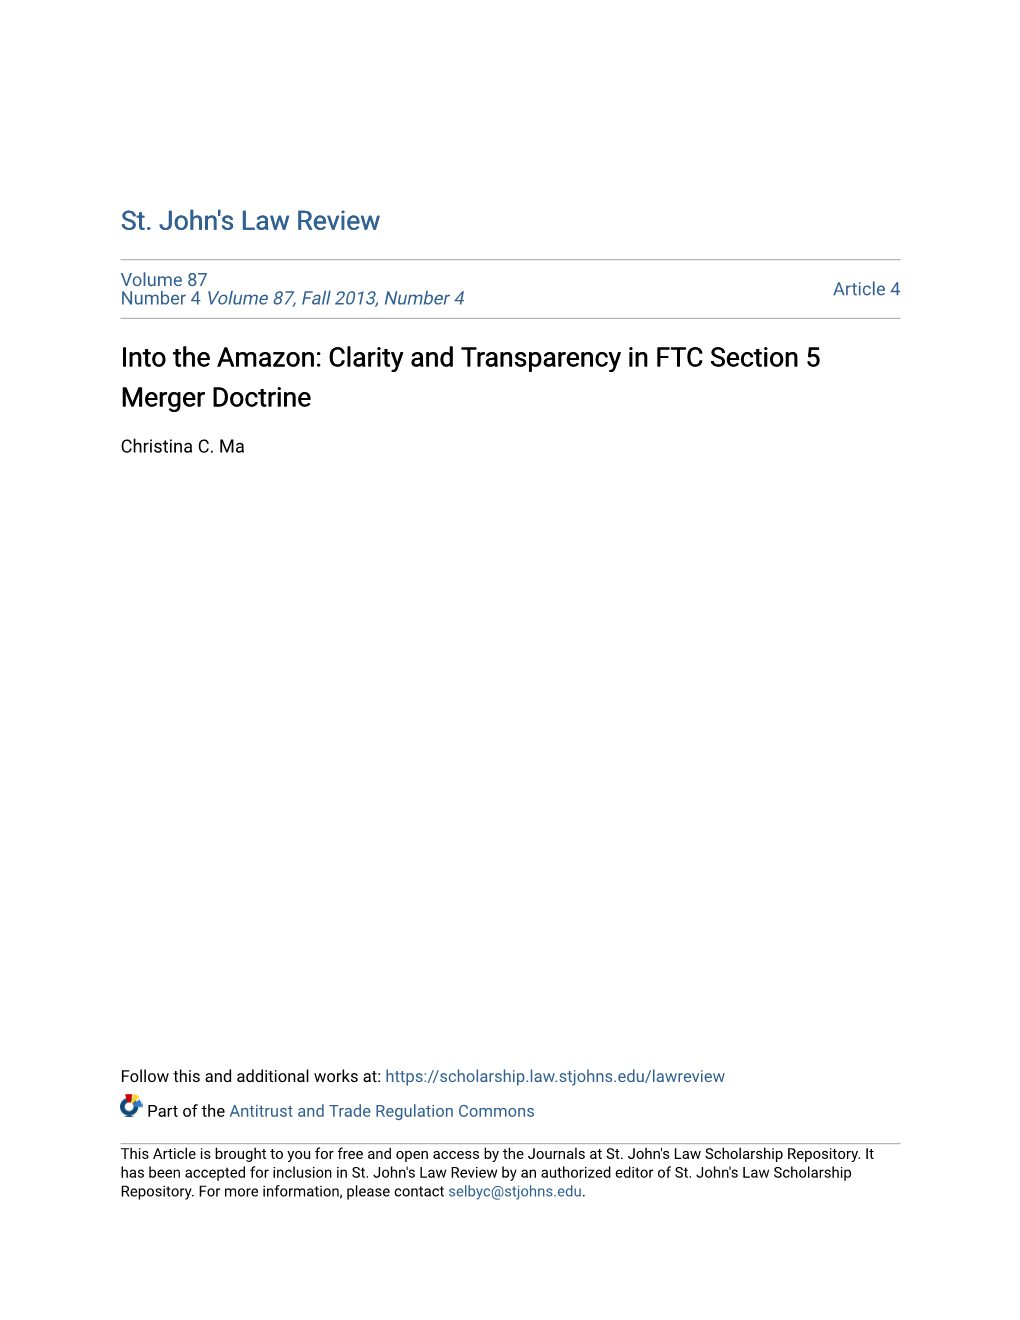 Into the Amazon: Clarity and Transparency in FTC Section 5 Merger Doctrine